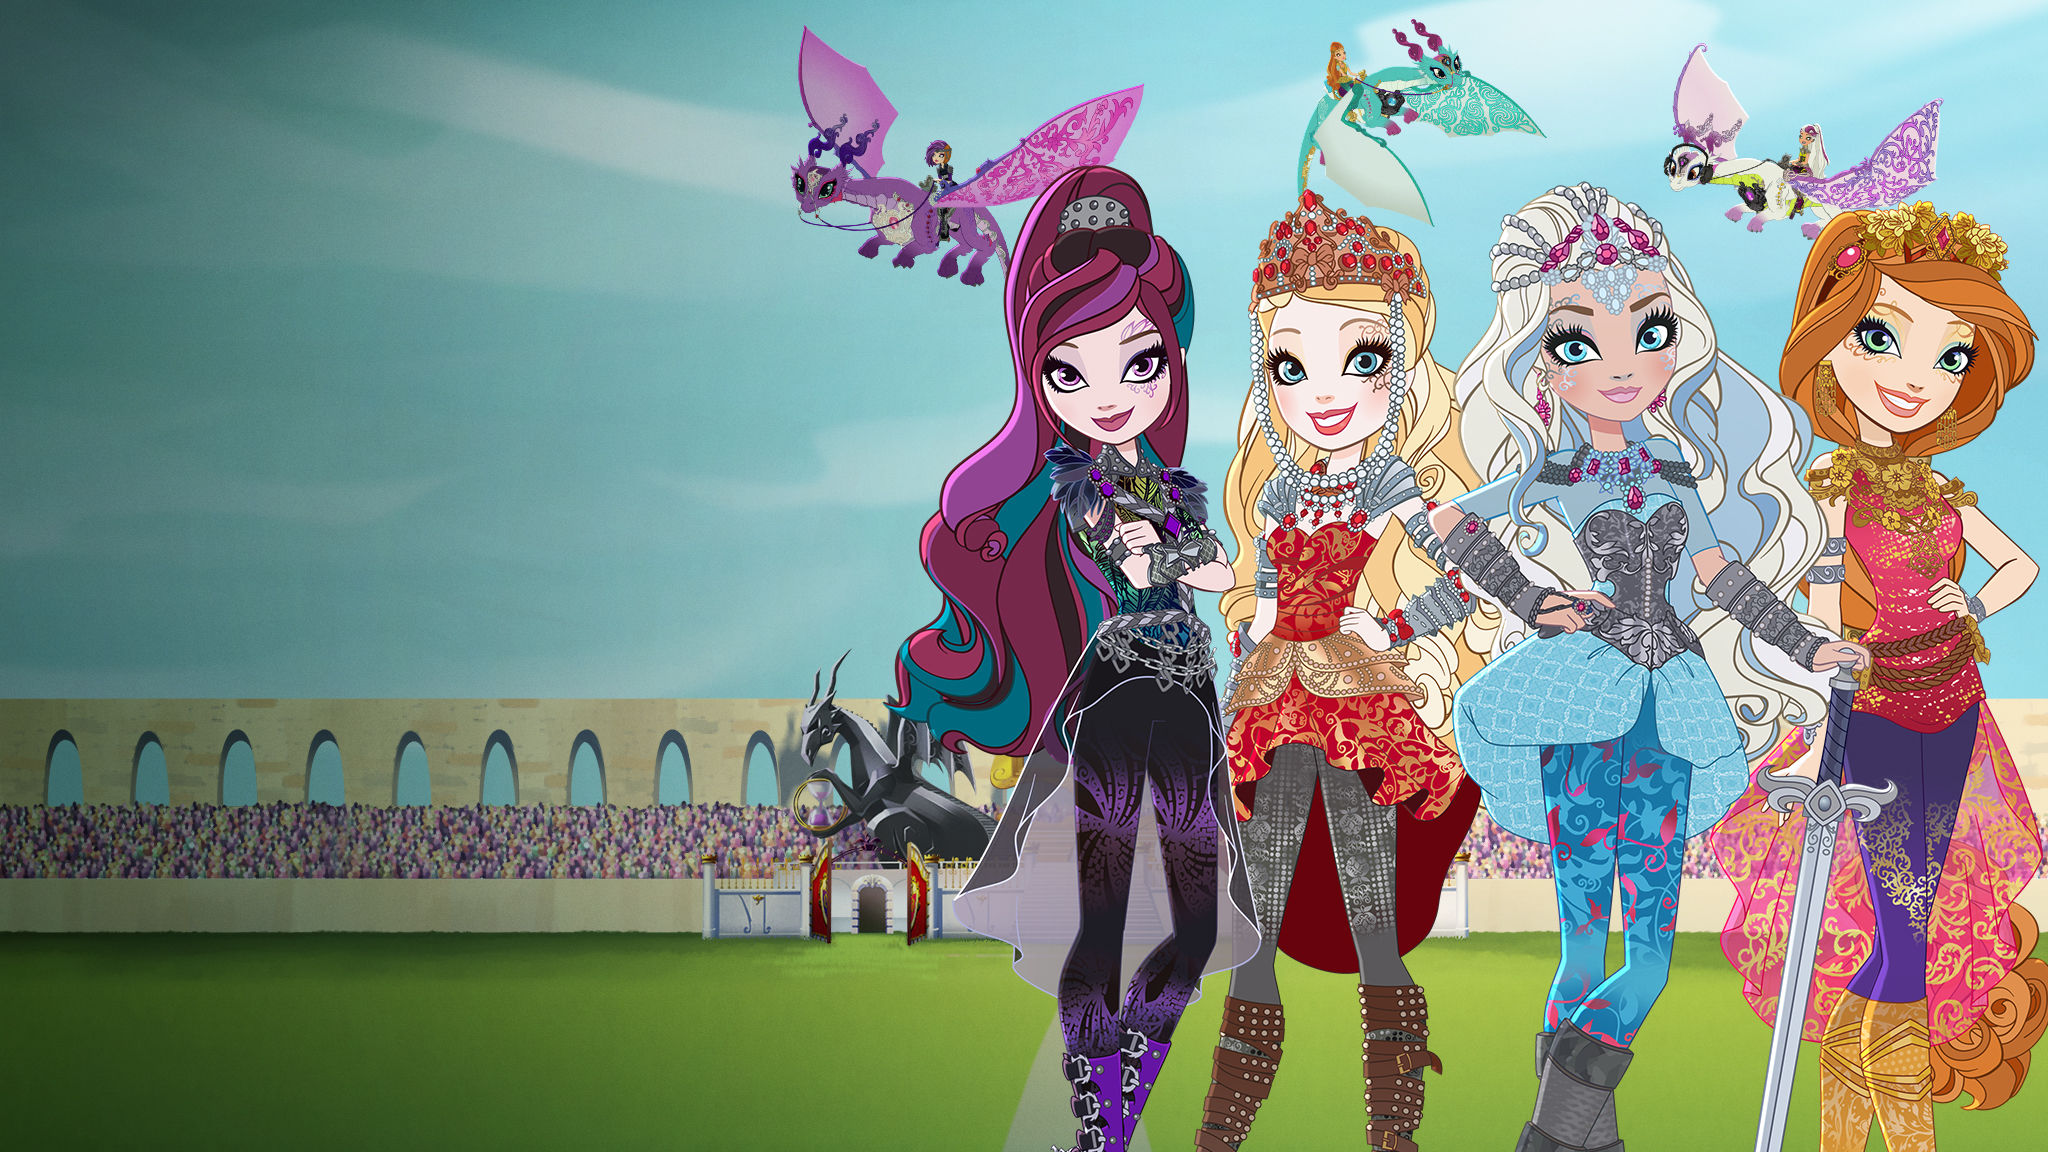  .     Ever After High